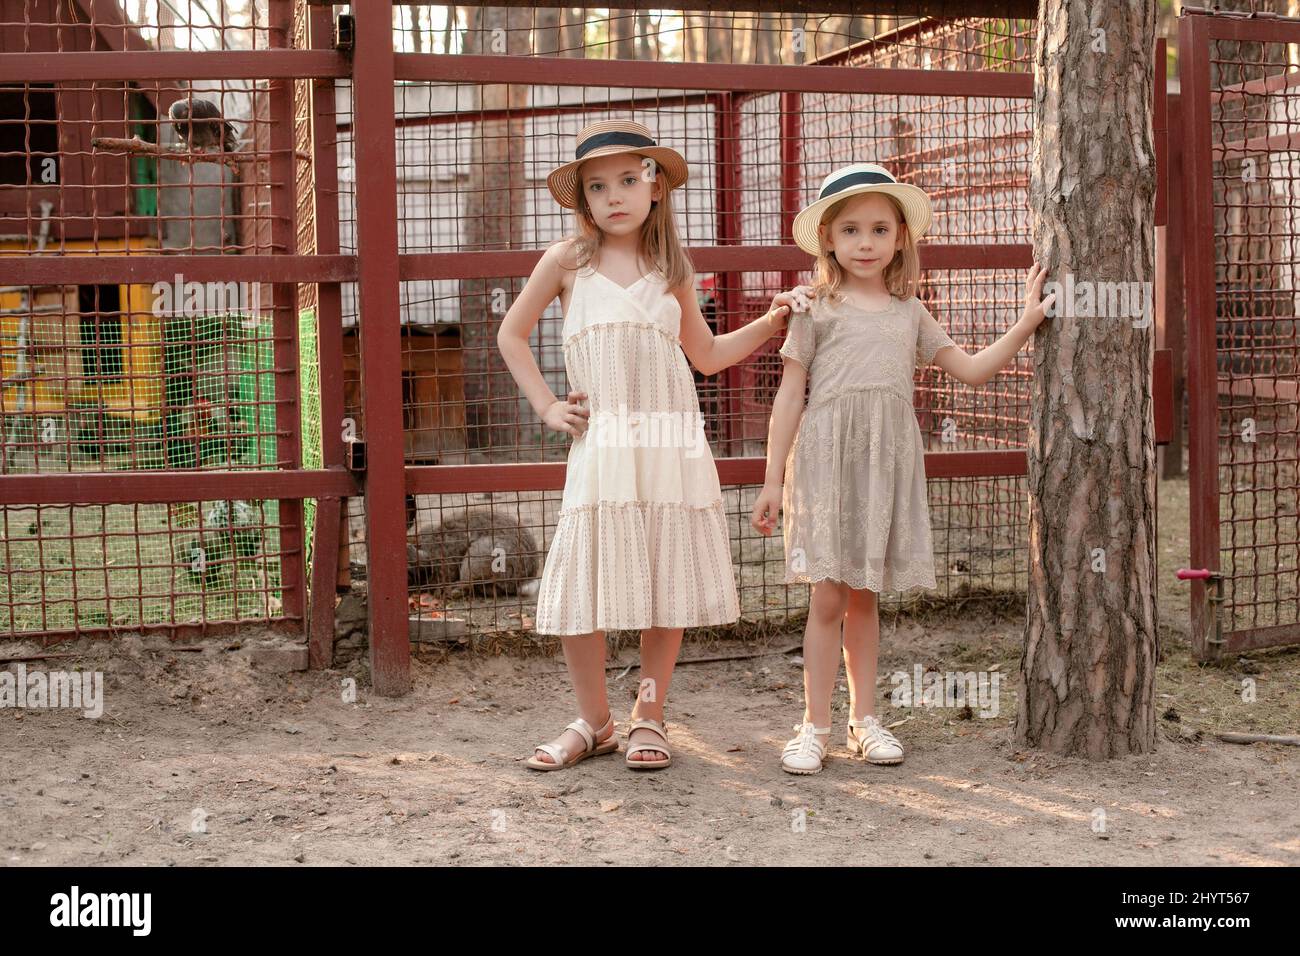 Two preteen girls standing near cages with domestic animals and birds in country estate Stock Photo